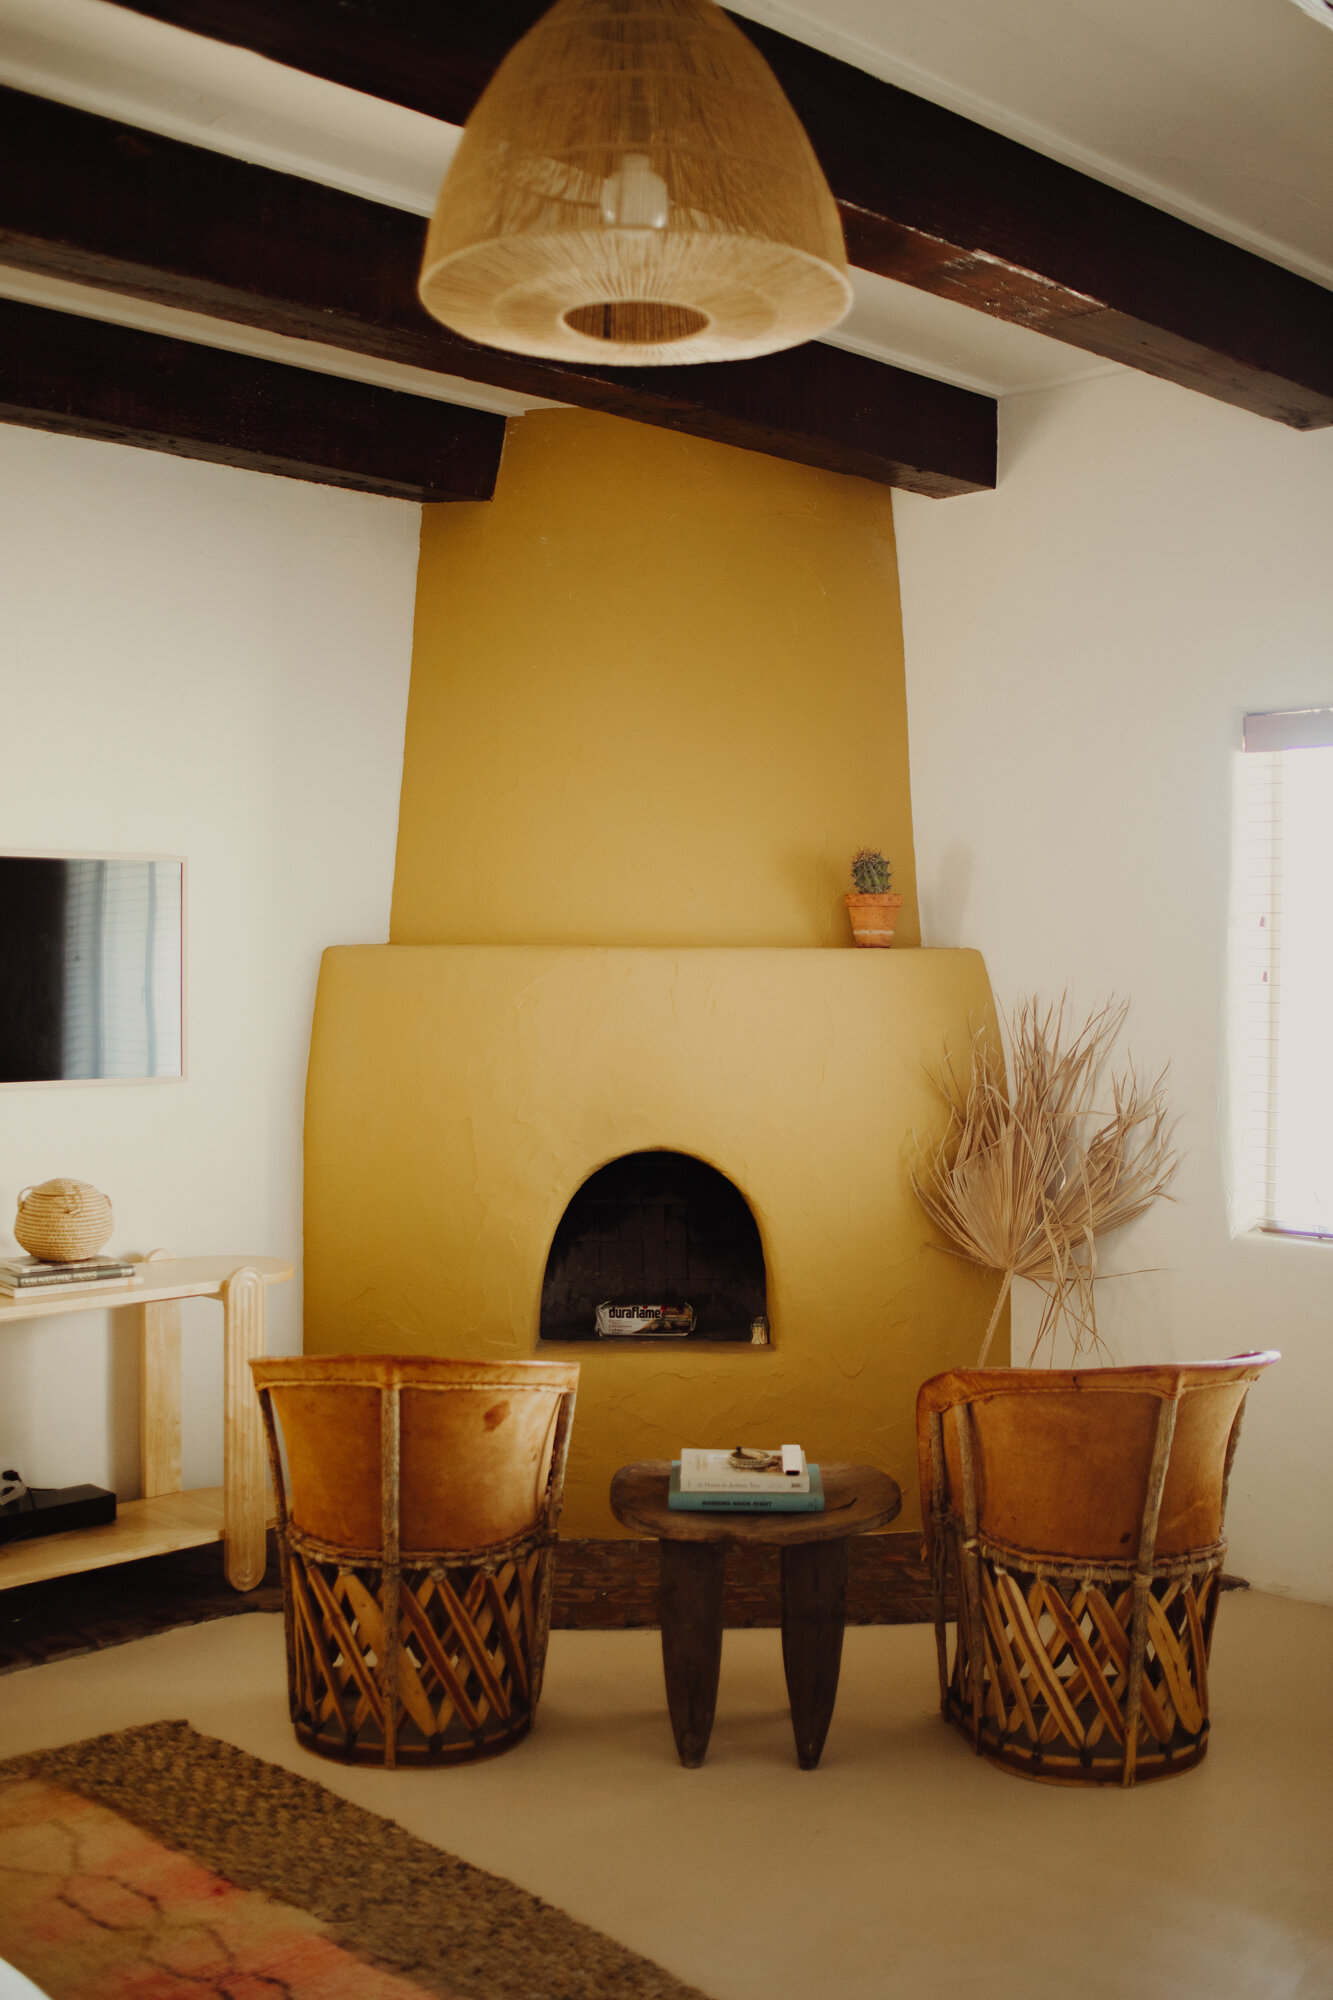 yucca-room-yellow-fireplace-joshua-treehouse-tucson-airbnb